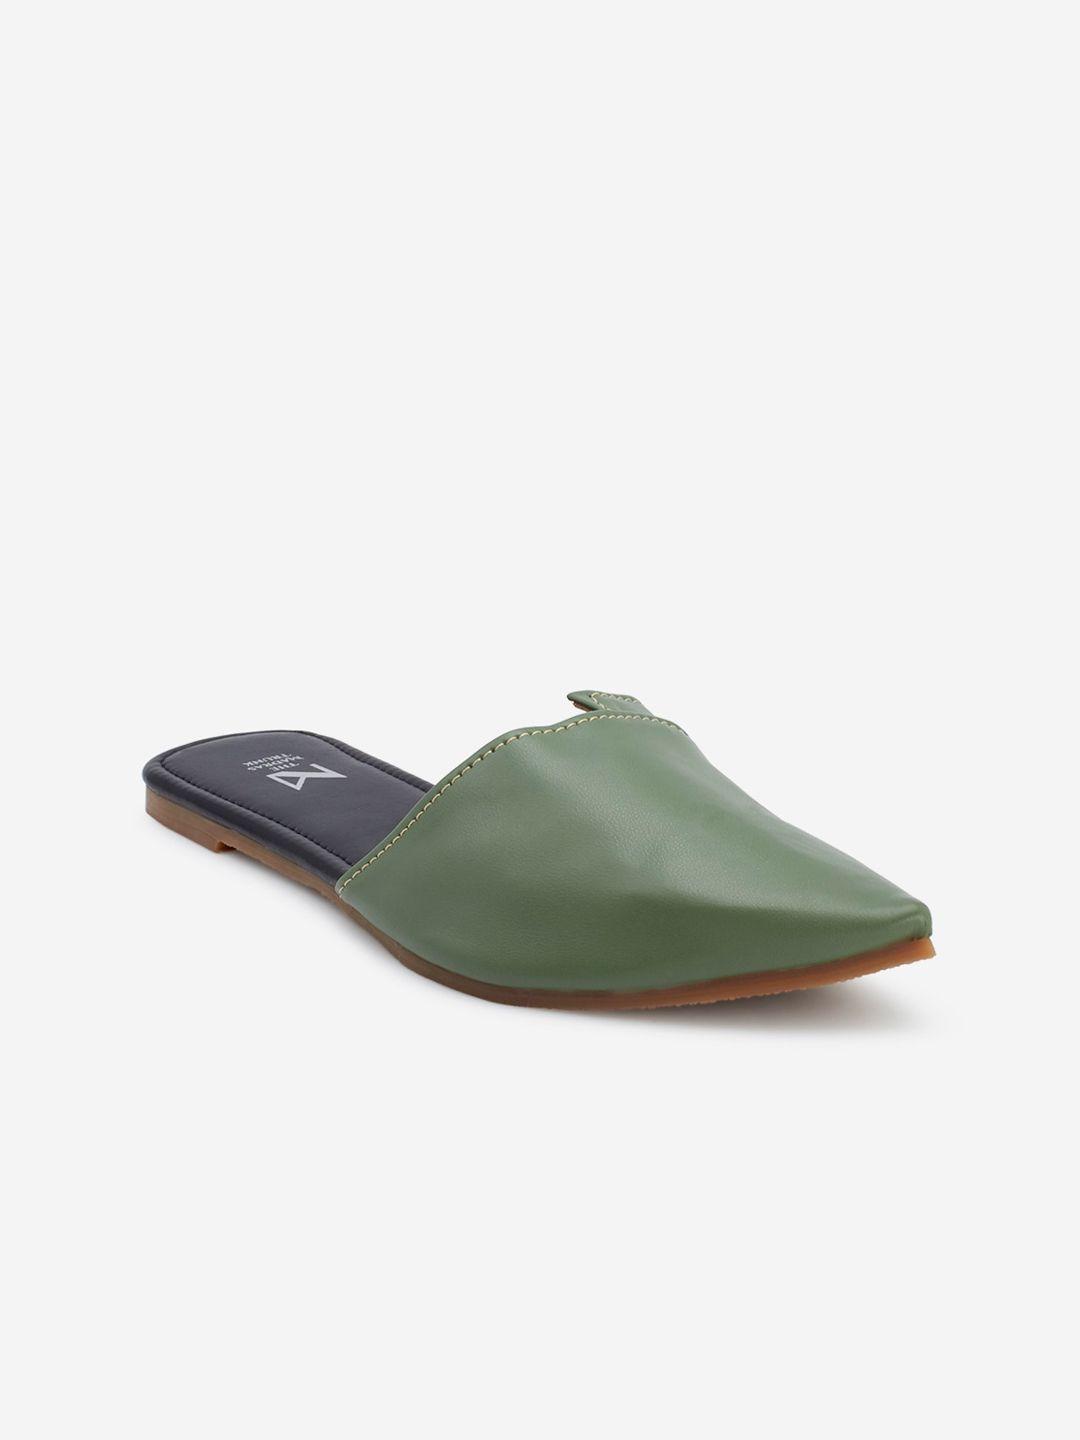 the madras trunk women olive green mules flats